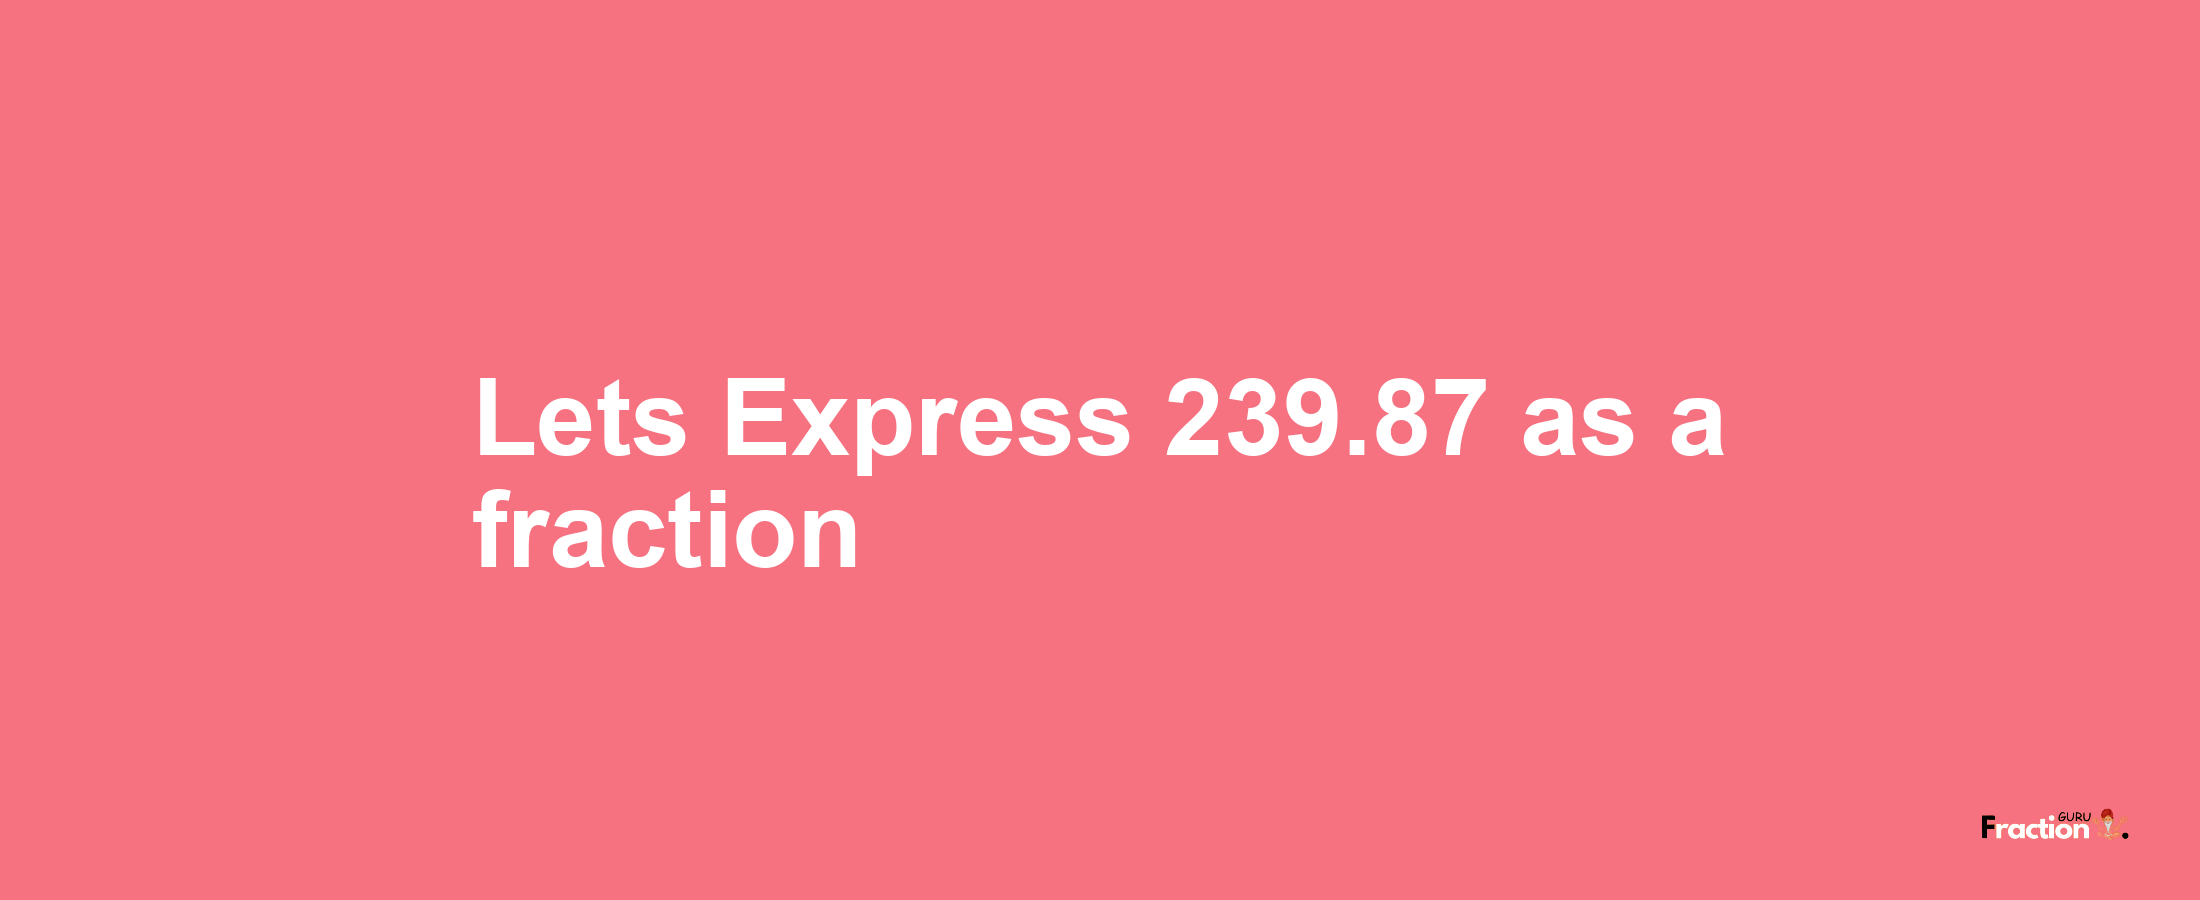 Lets Express 239.87 as afraction